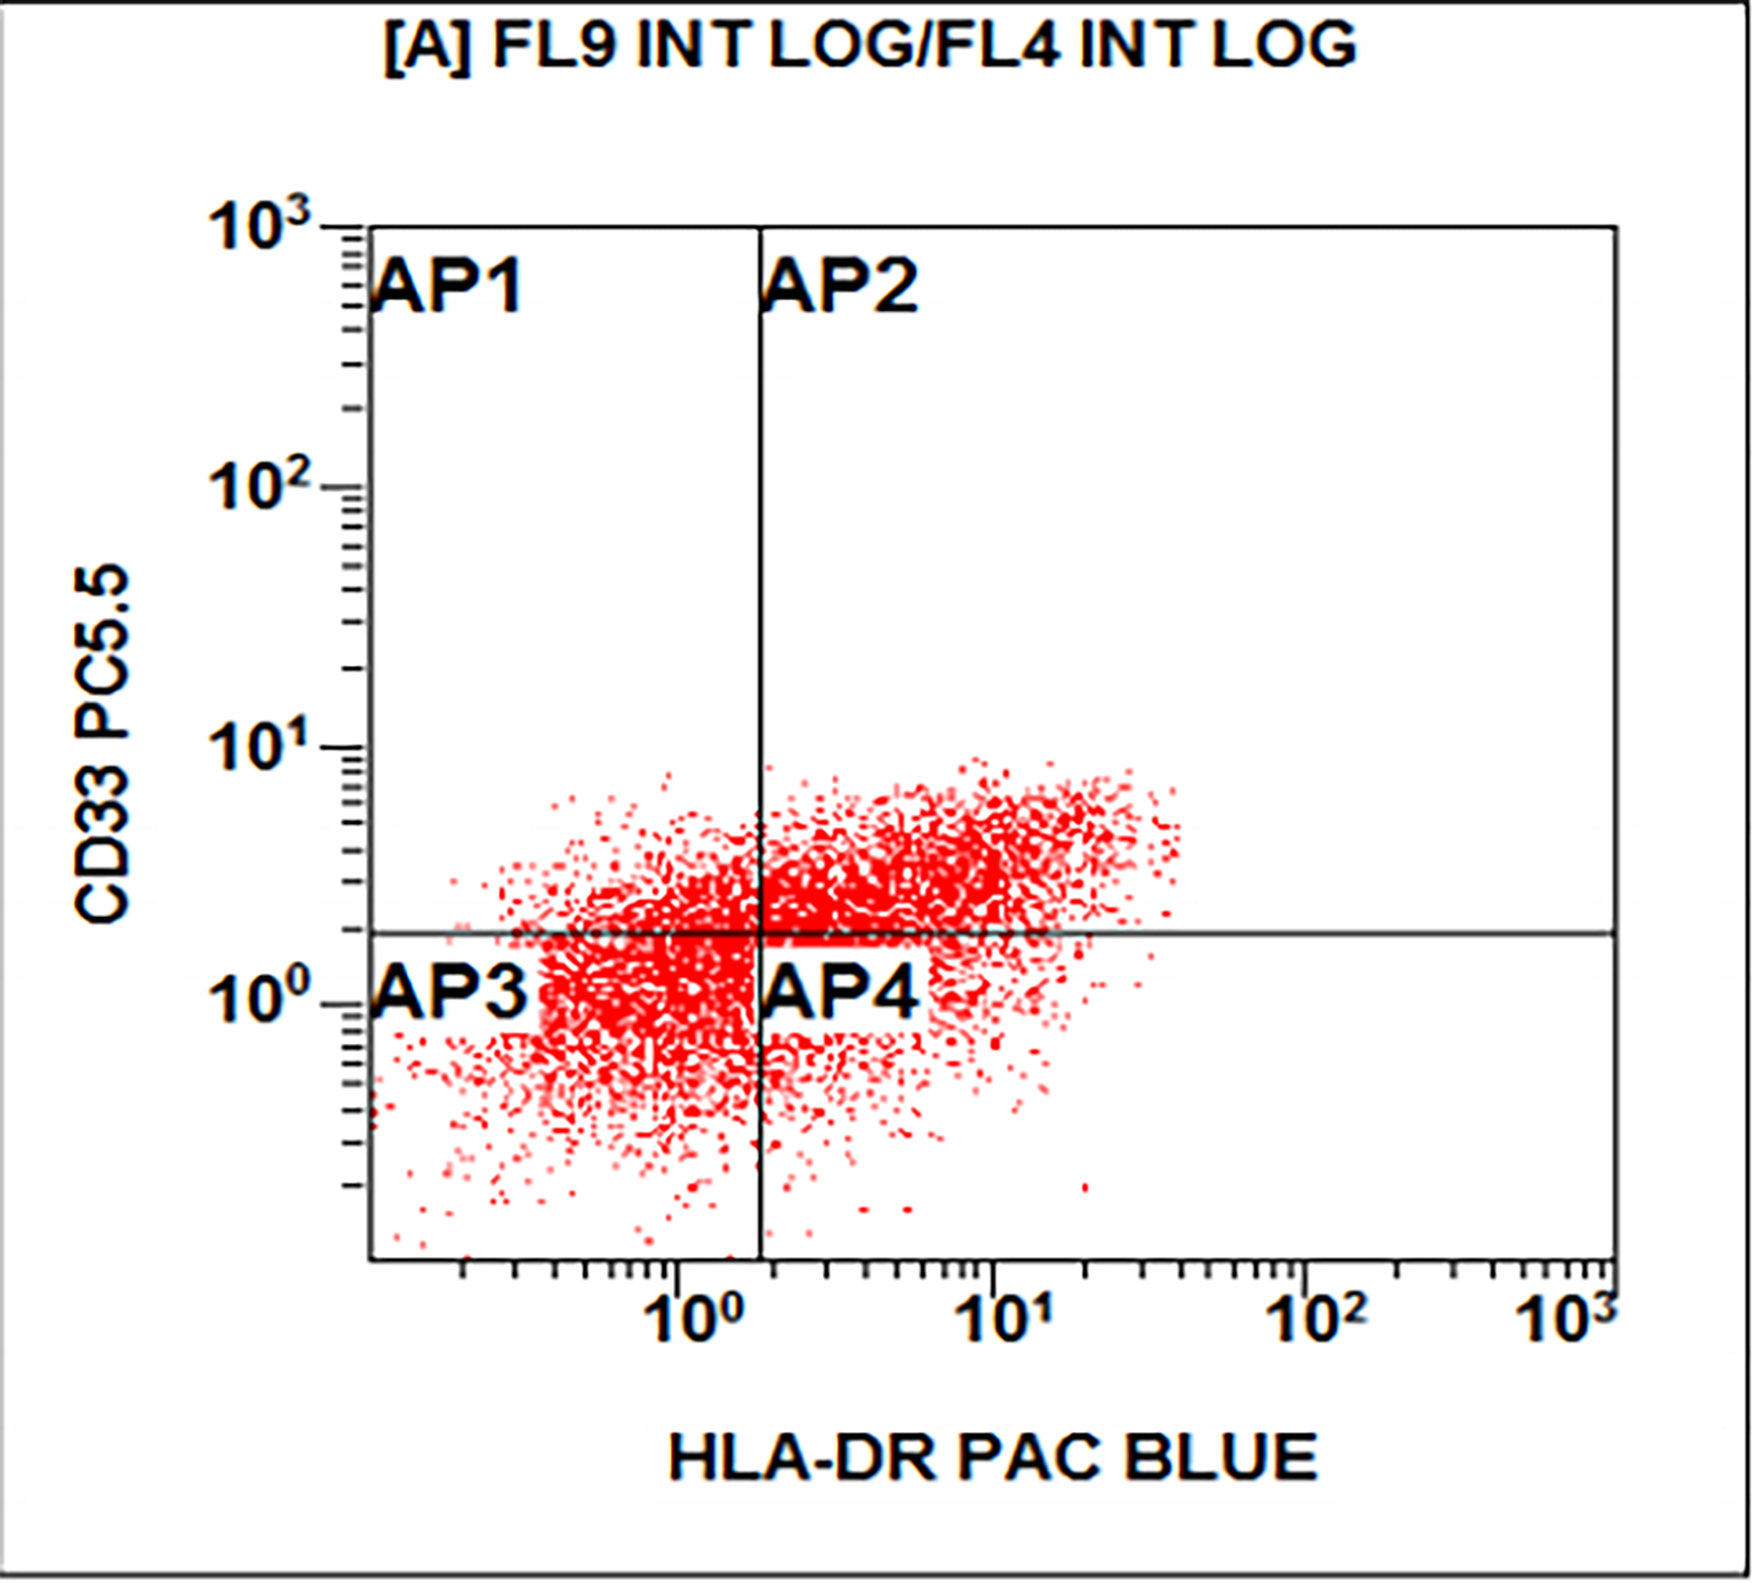 Increased blasts with HLA-DR, CD33